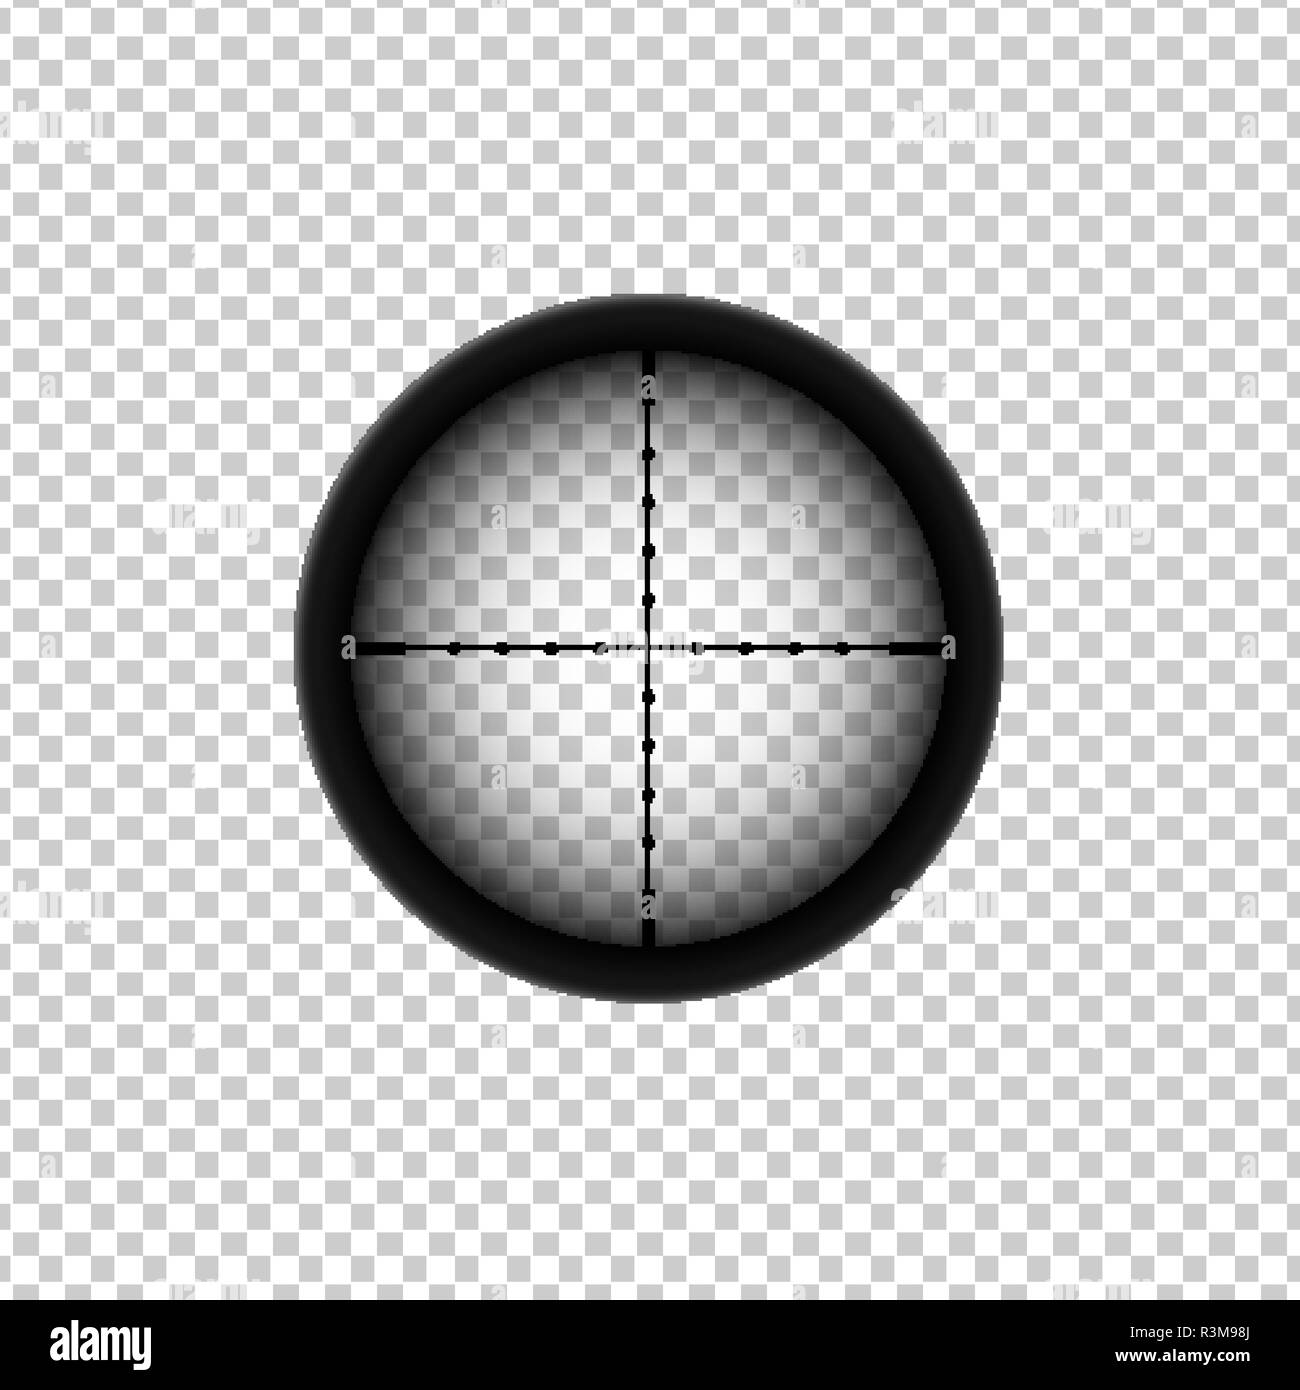 Sniper automatic rifle crosshairs. Gun viewfinder target icon Stock Vector